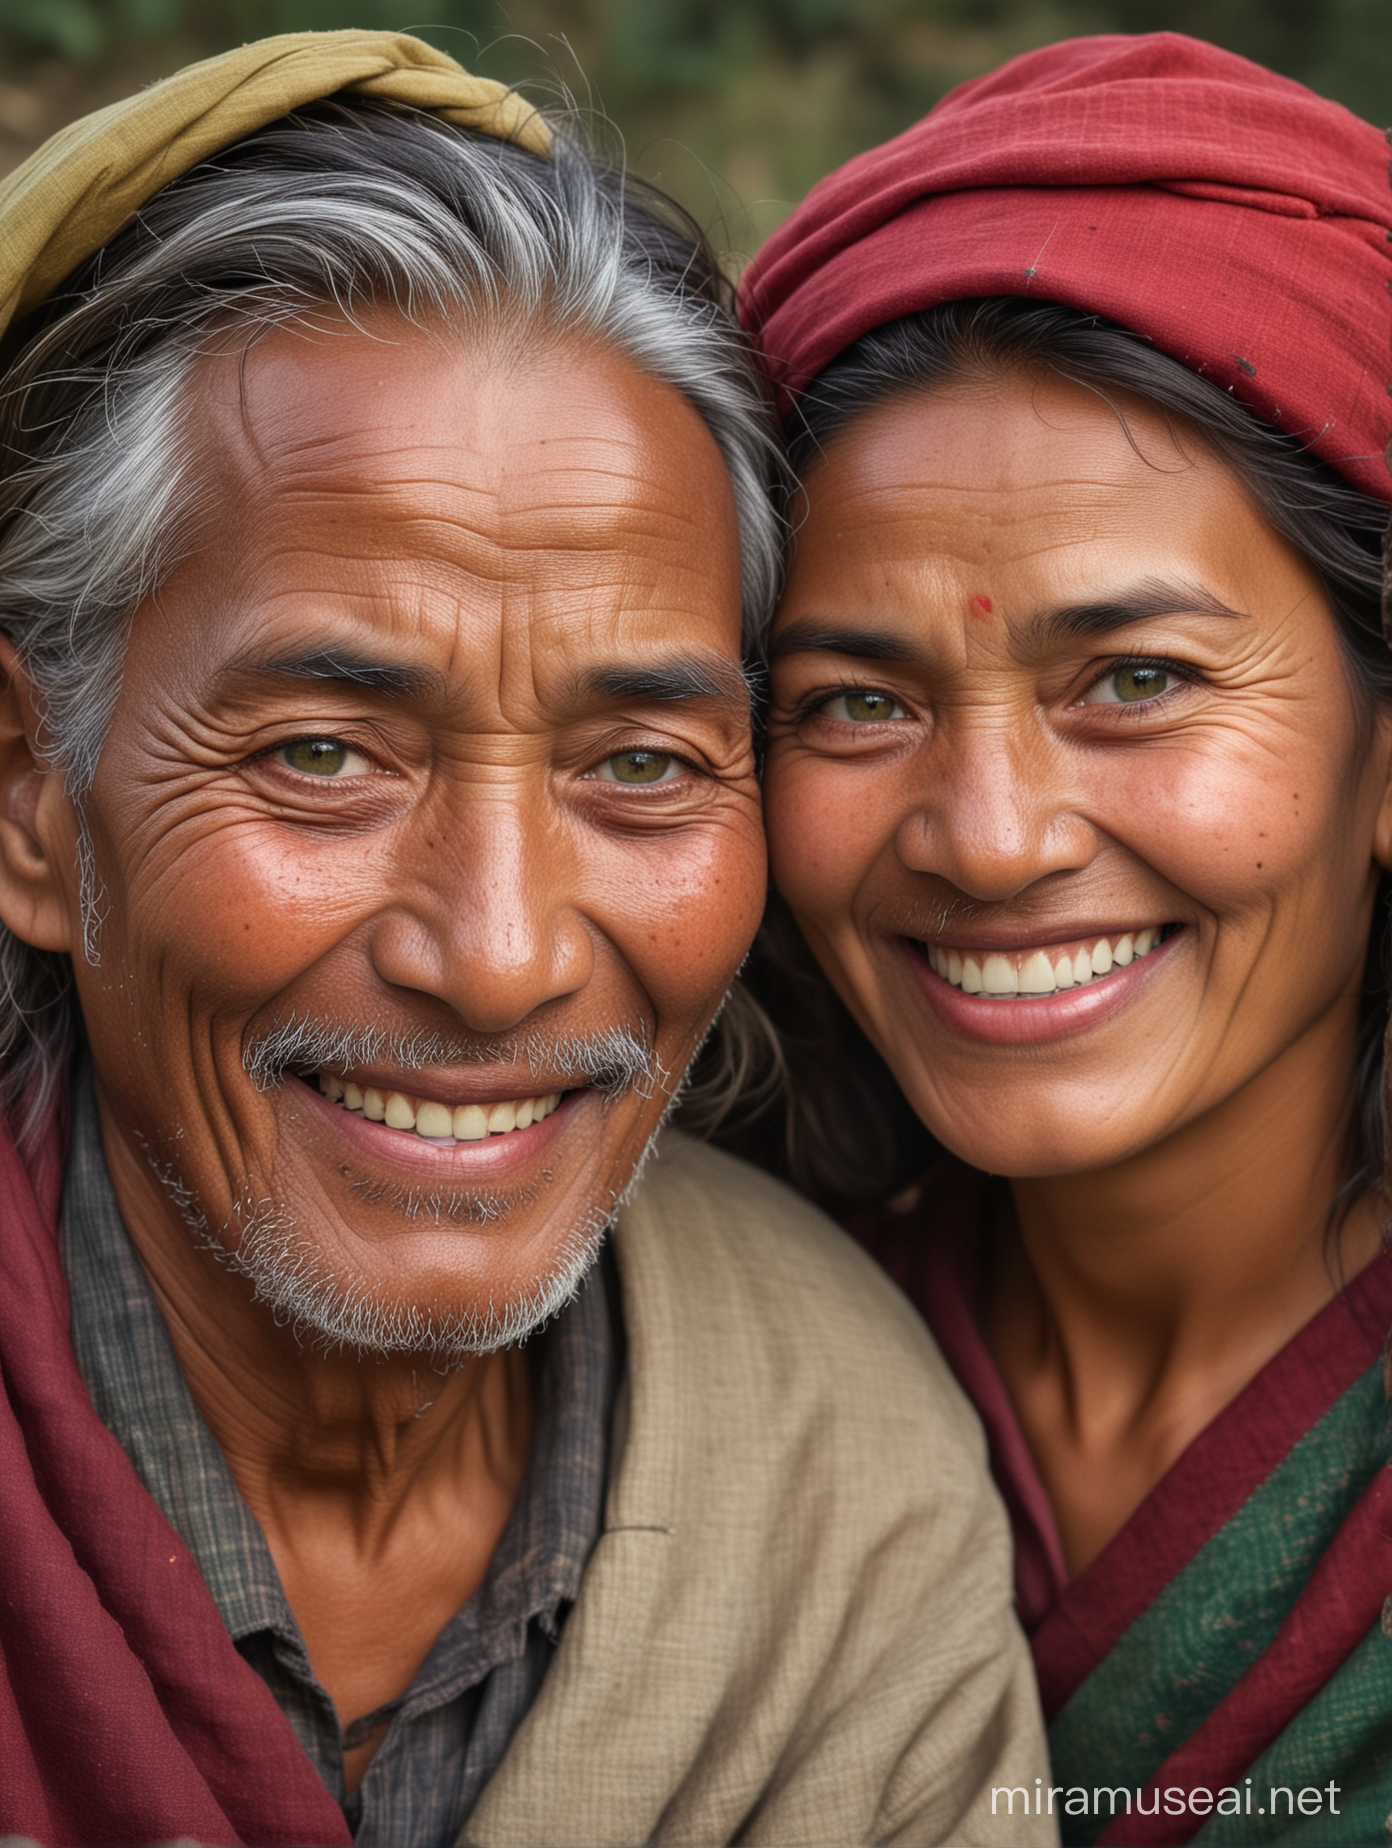 Nepali Grandparents in Traditional Attire Smiling with Natural Beauty